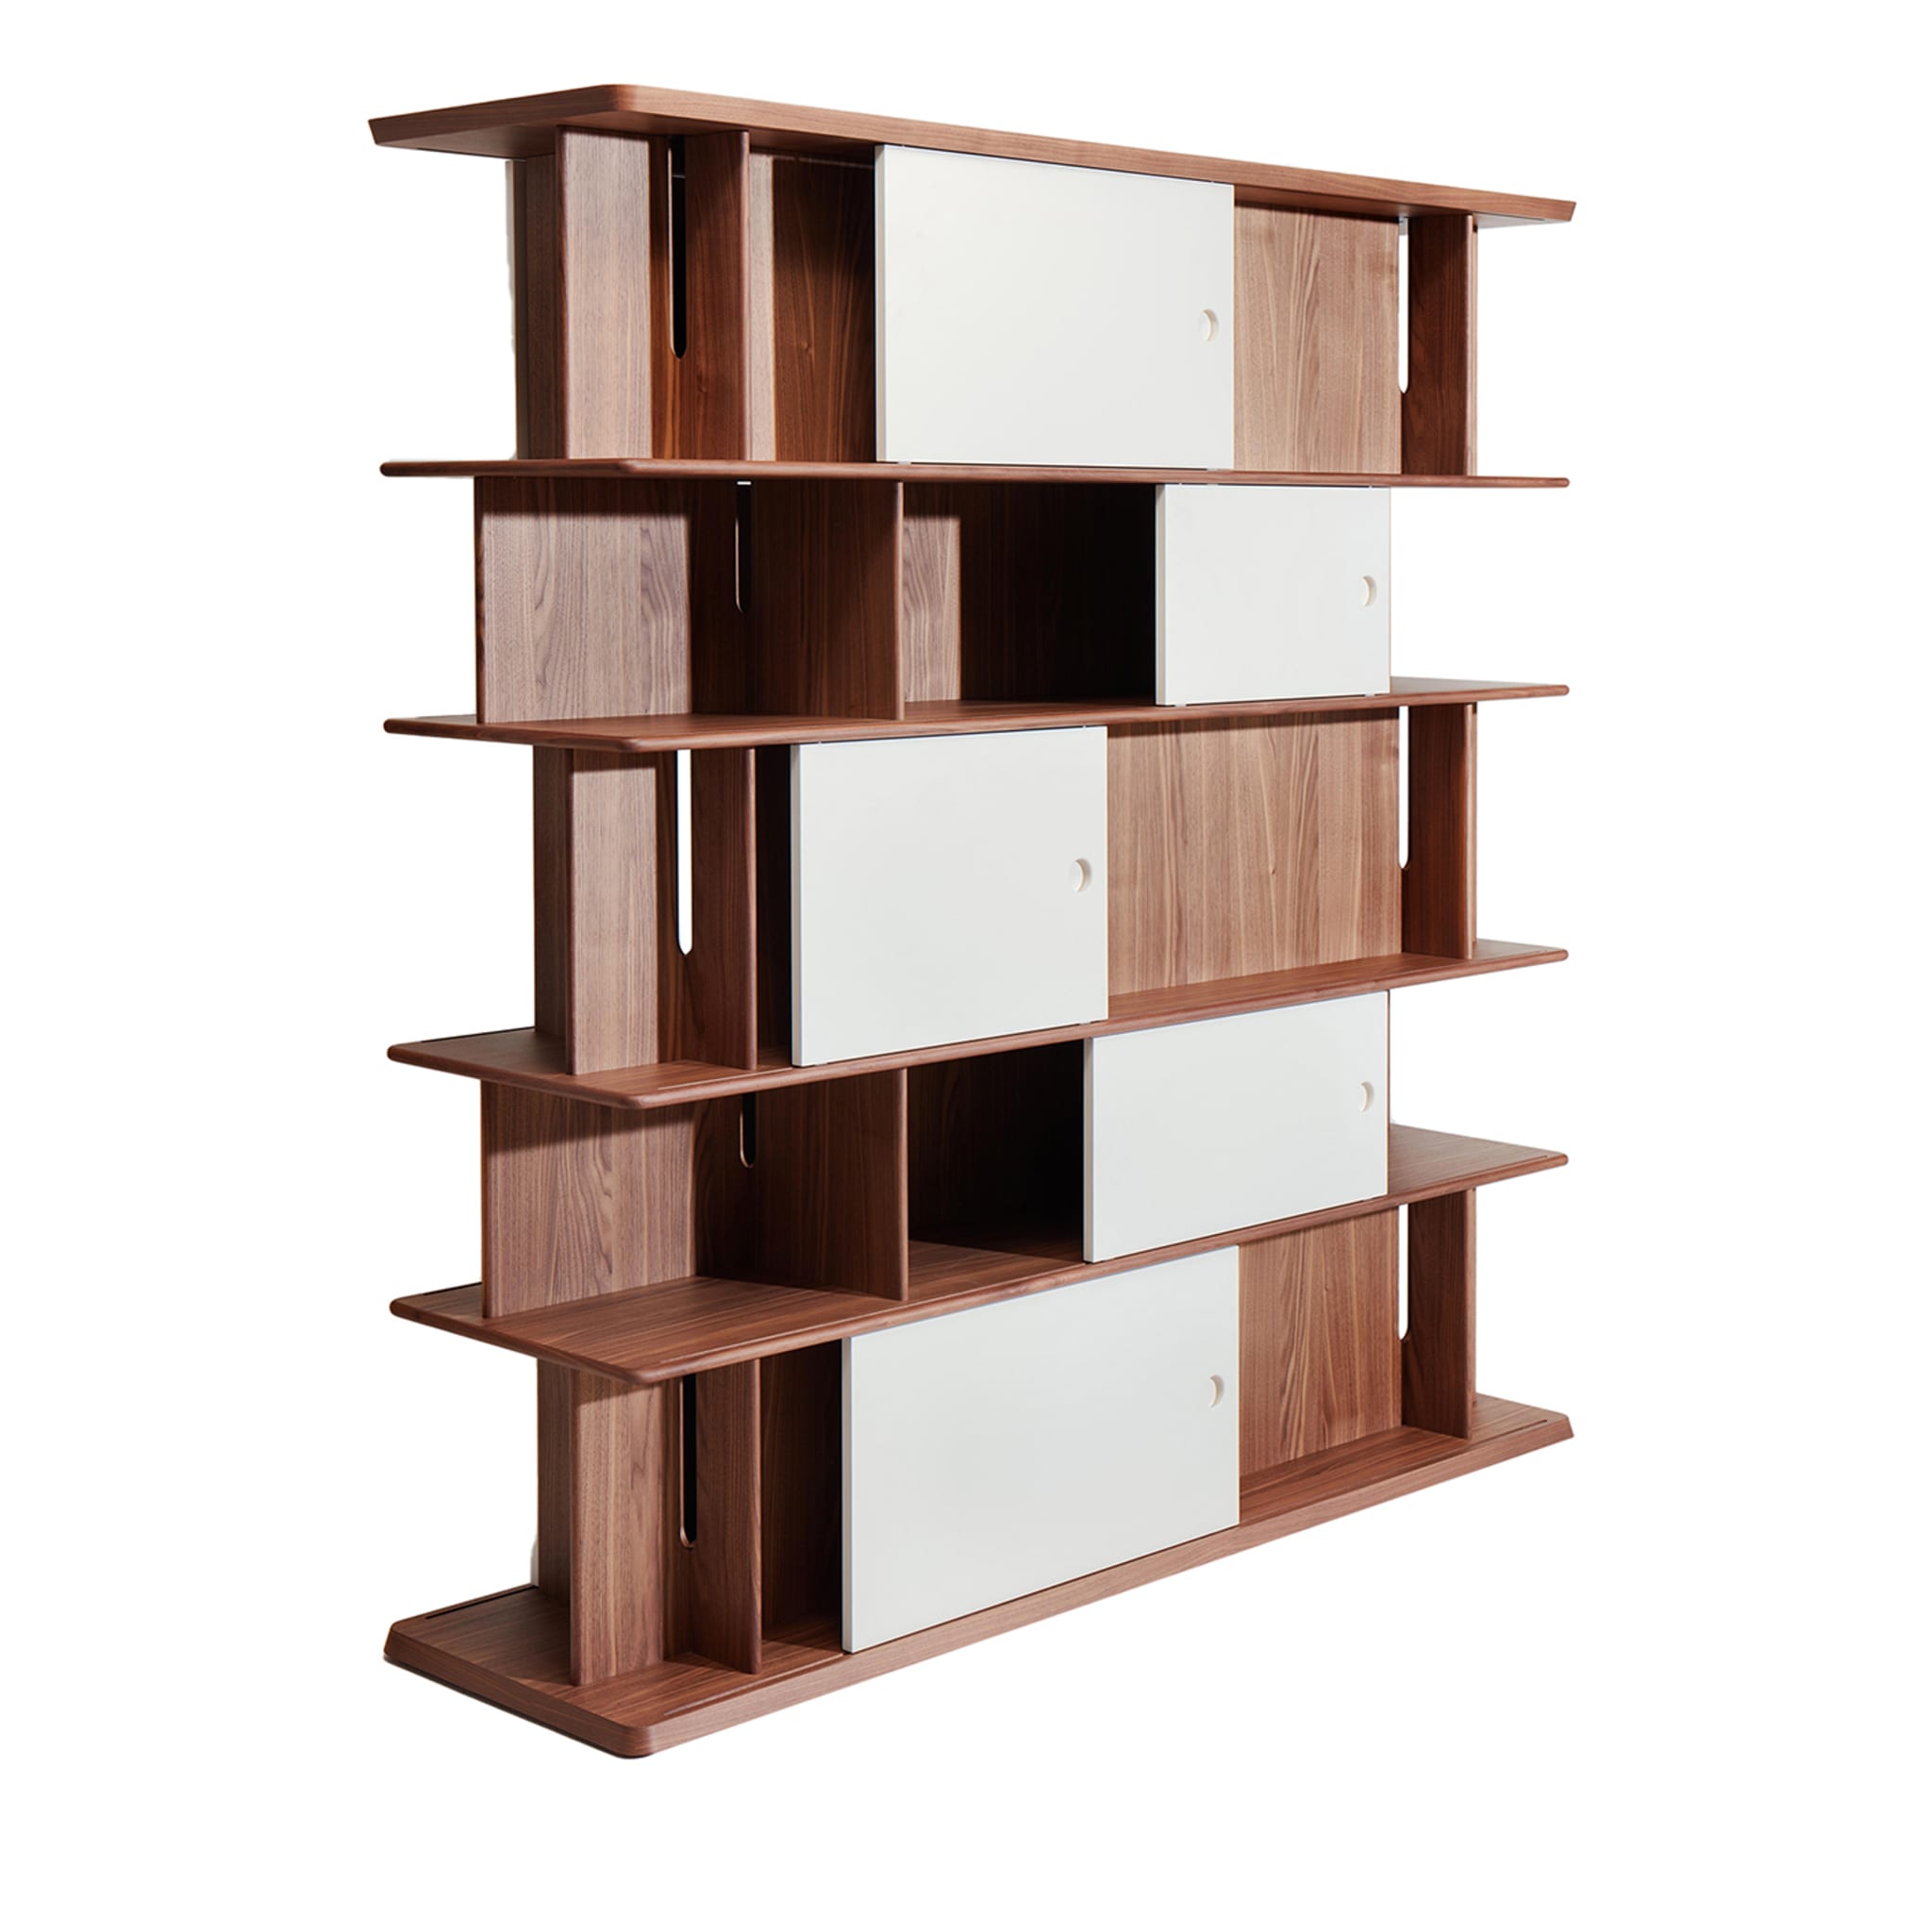 Intersection Large Bookcase by Neri&Hu - Main view